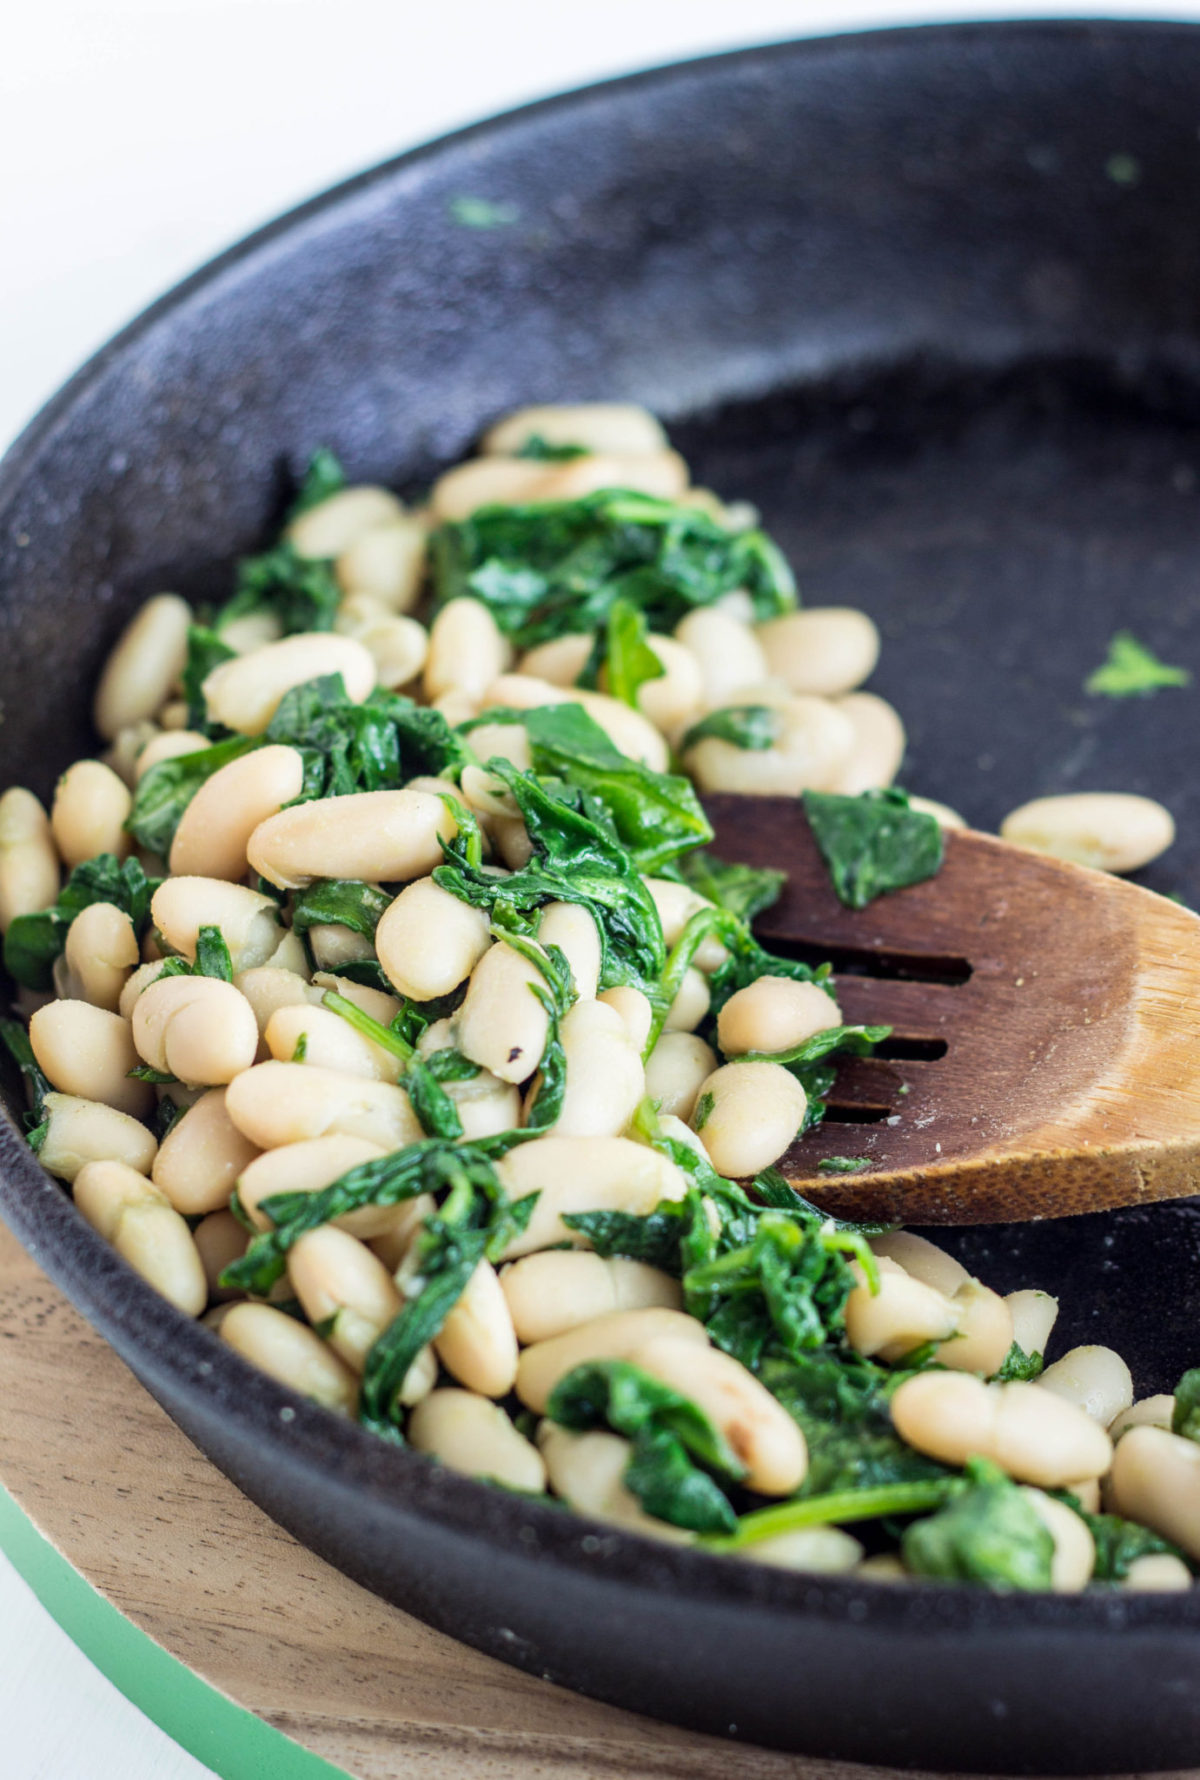 Image of white beans and sautéed spinach in a skillet.